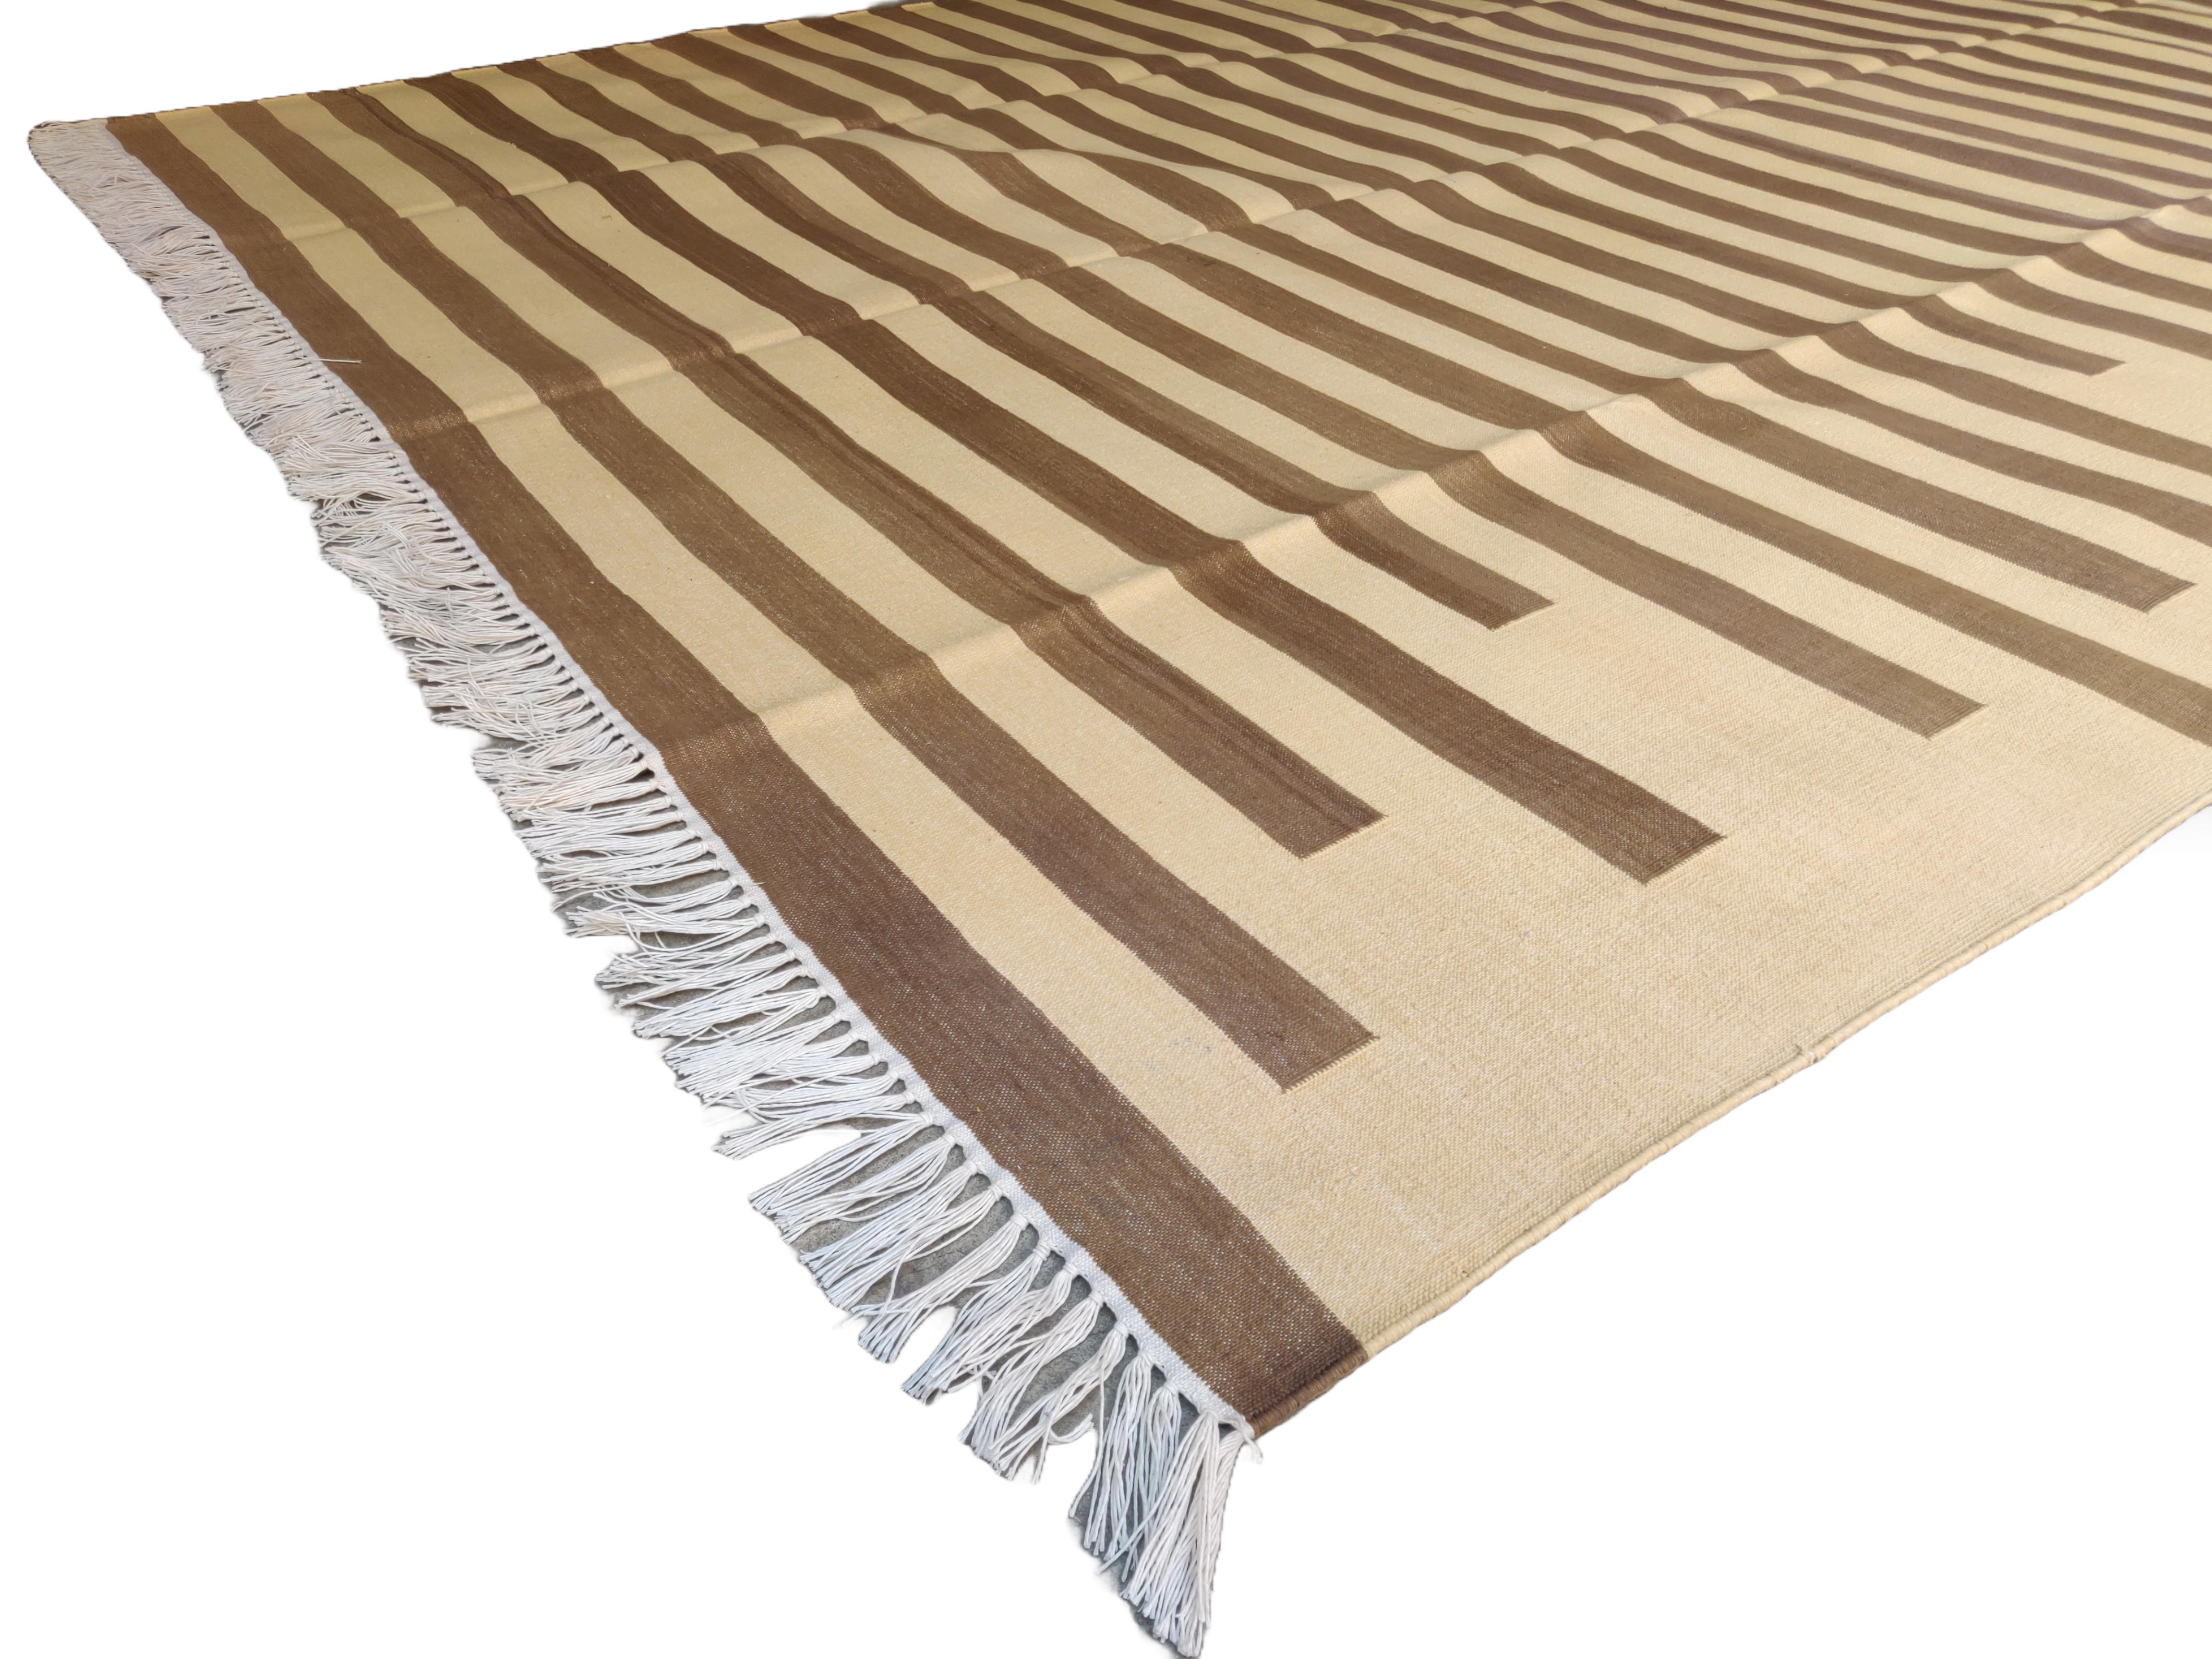 Cotton Vegetable Dyed Brown And Yellow Striped Indian Dhurrie Rug-6'x9' (180x270cm) 

These special flat-weave dhurries are hand-woven with 15 ply 100% cotton yarn. Due to the special manufacturing techniques used to create our rugs, the size and